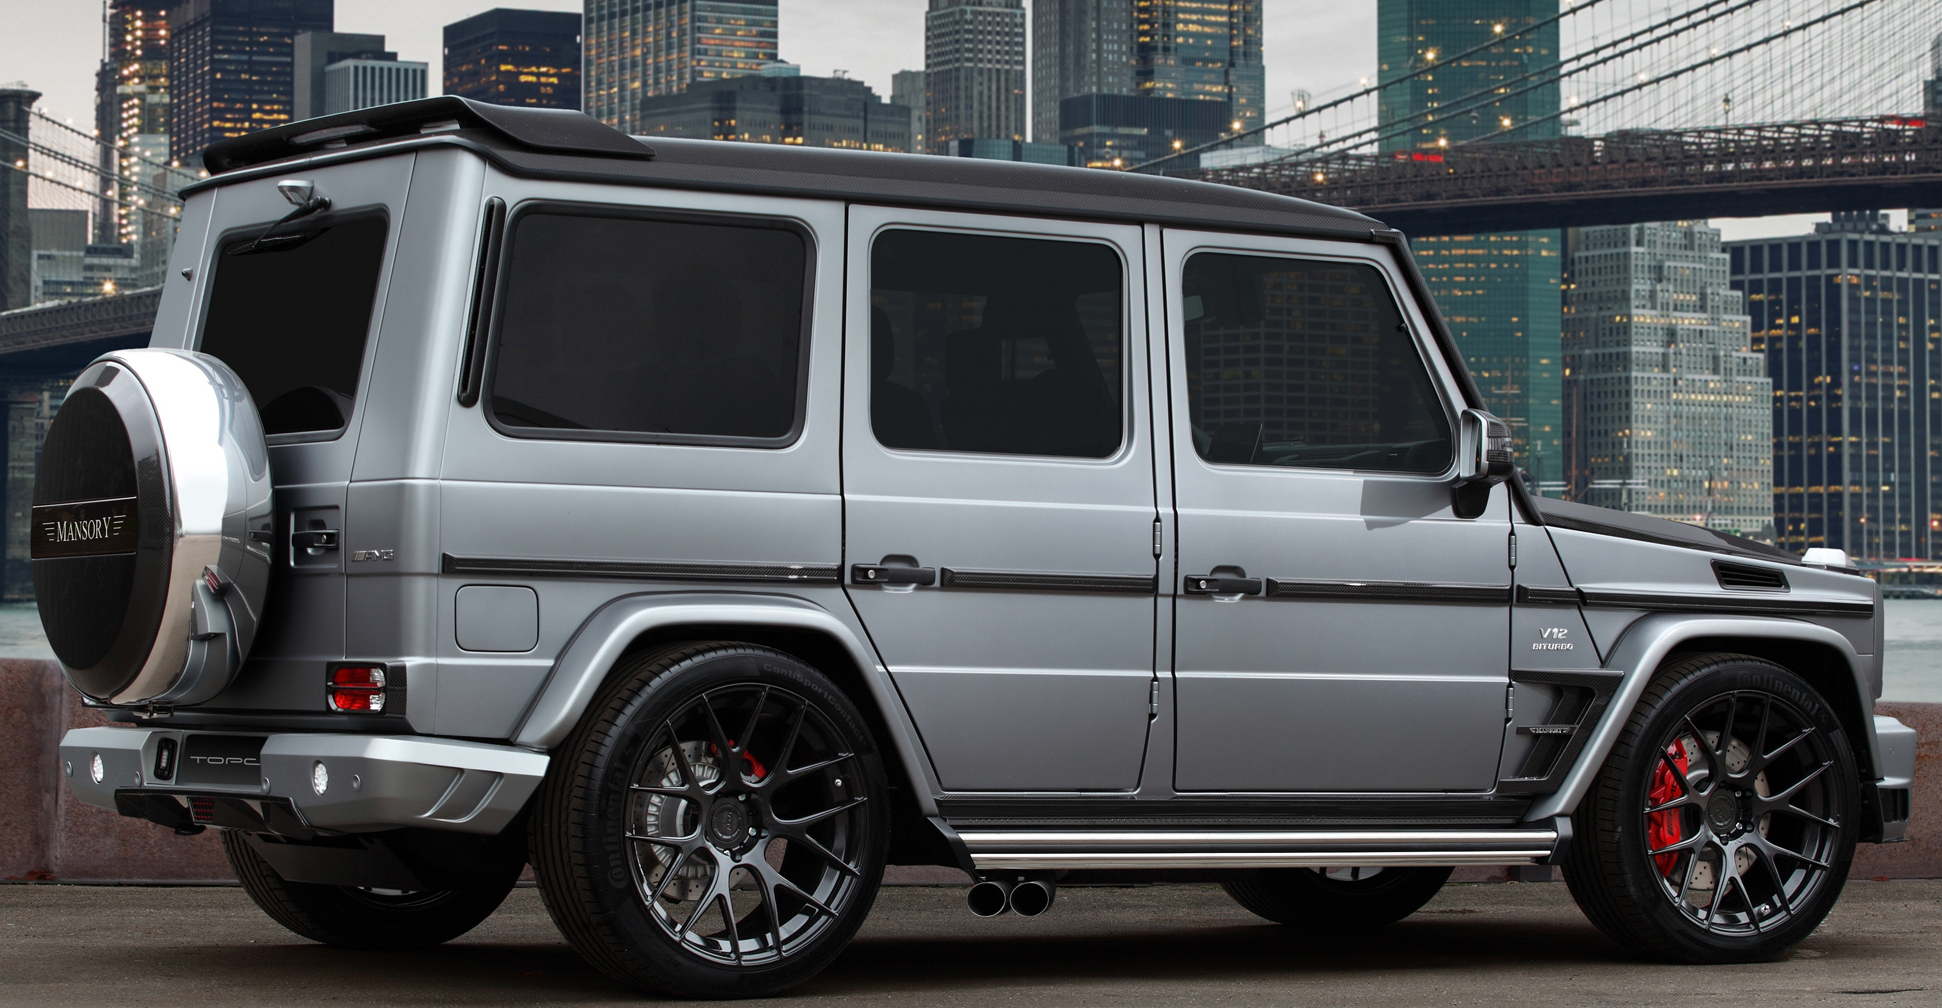 Mercedes Benz Tuning, Mercedes Styling, Mercedes Tuning, G